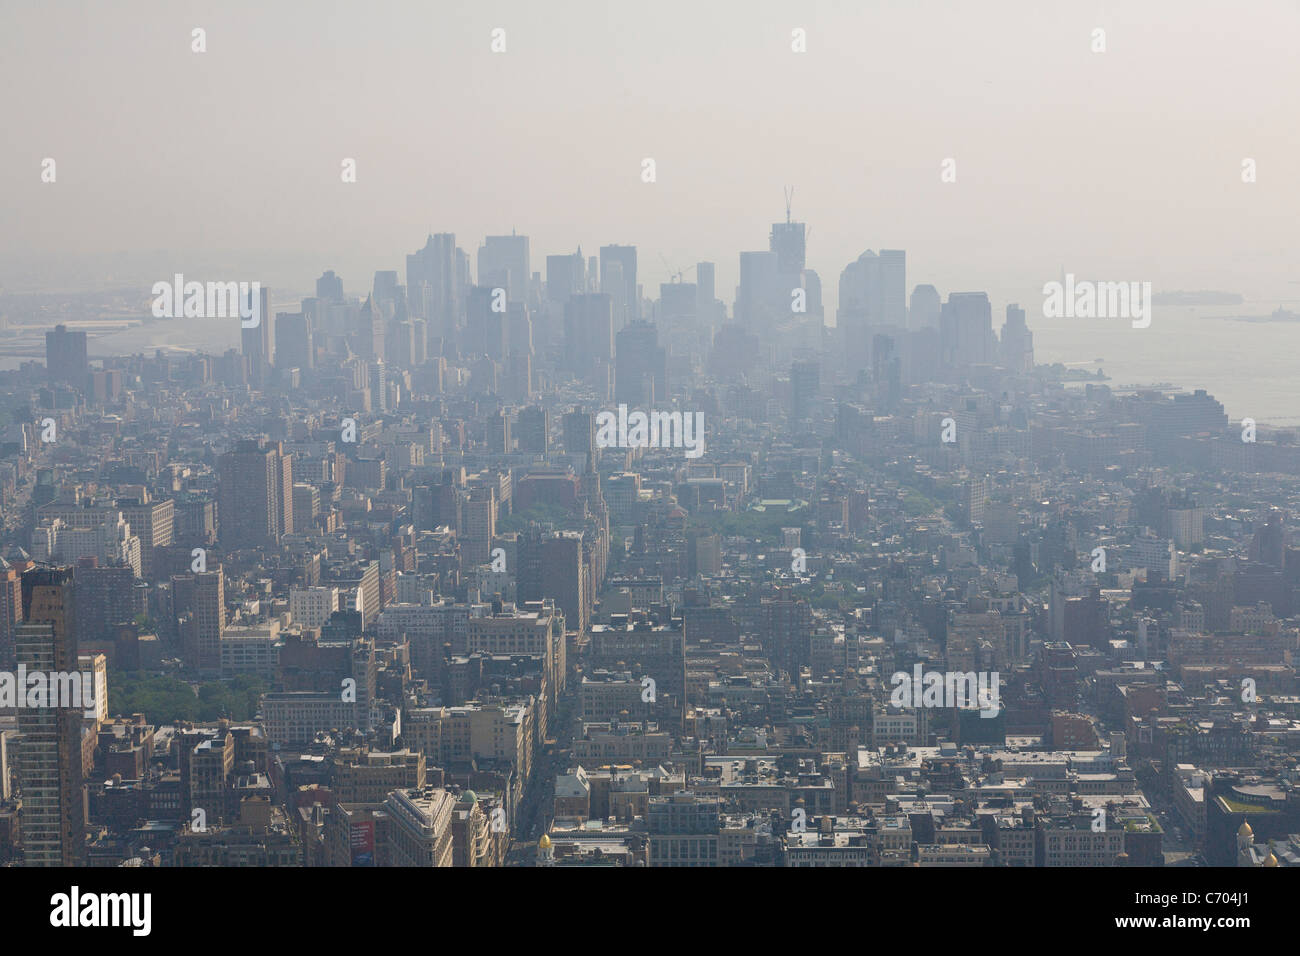 Lower Manhattan on a hot hazy day in New York City Stock Photo